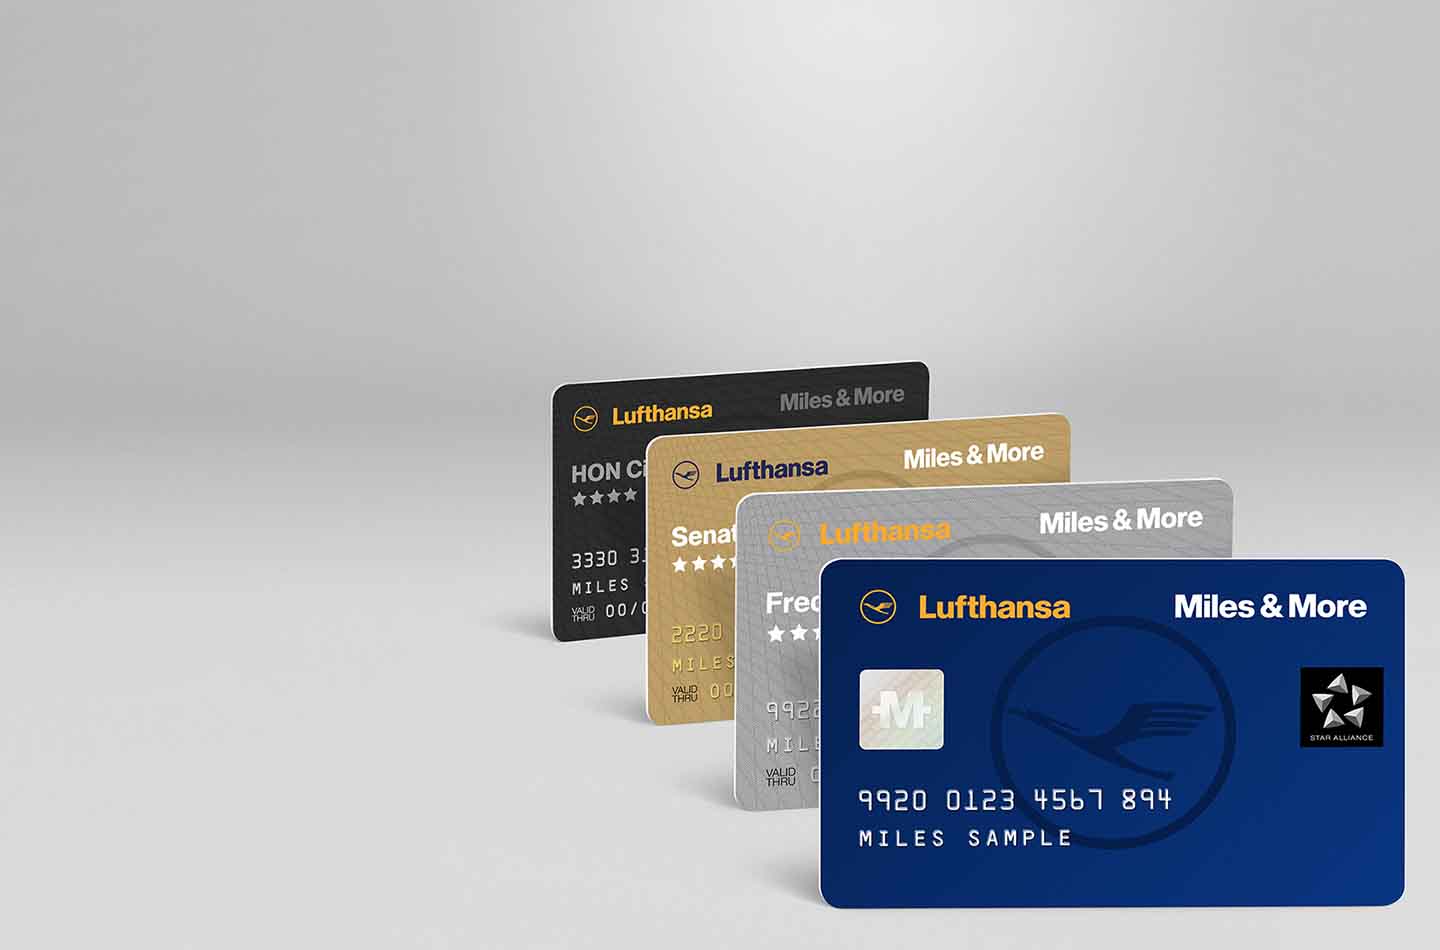 11 best ways to use lufthansa miles & more miles [2022]